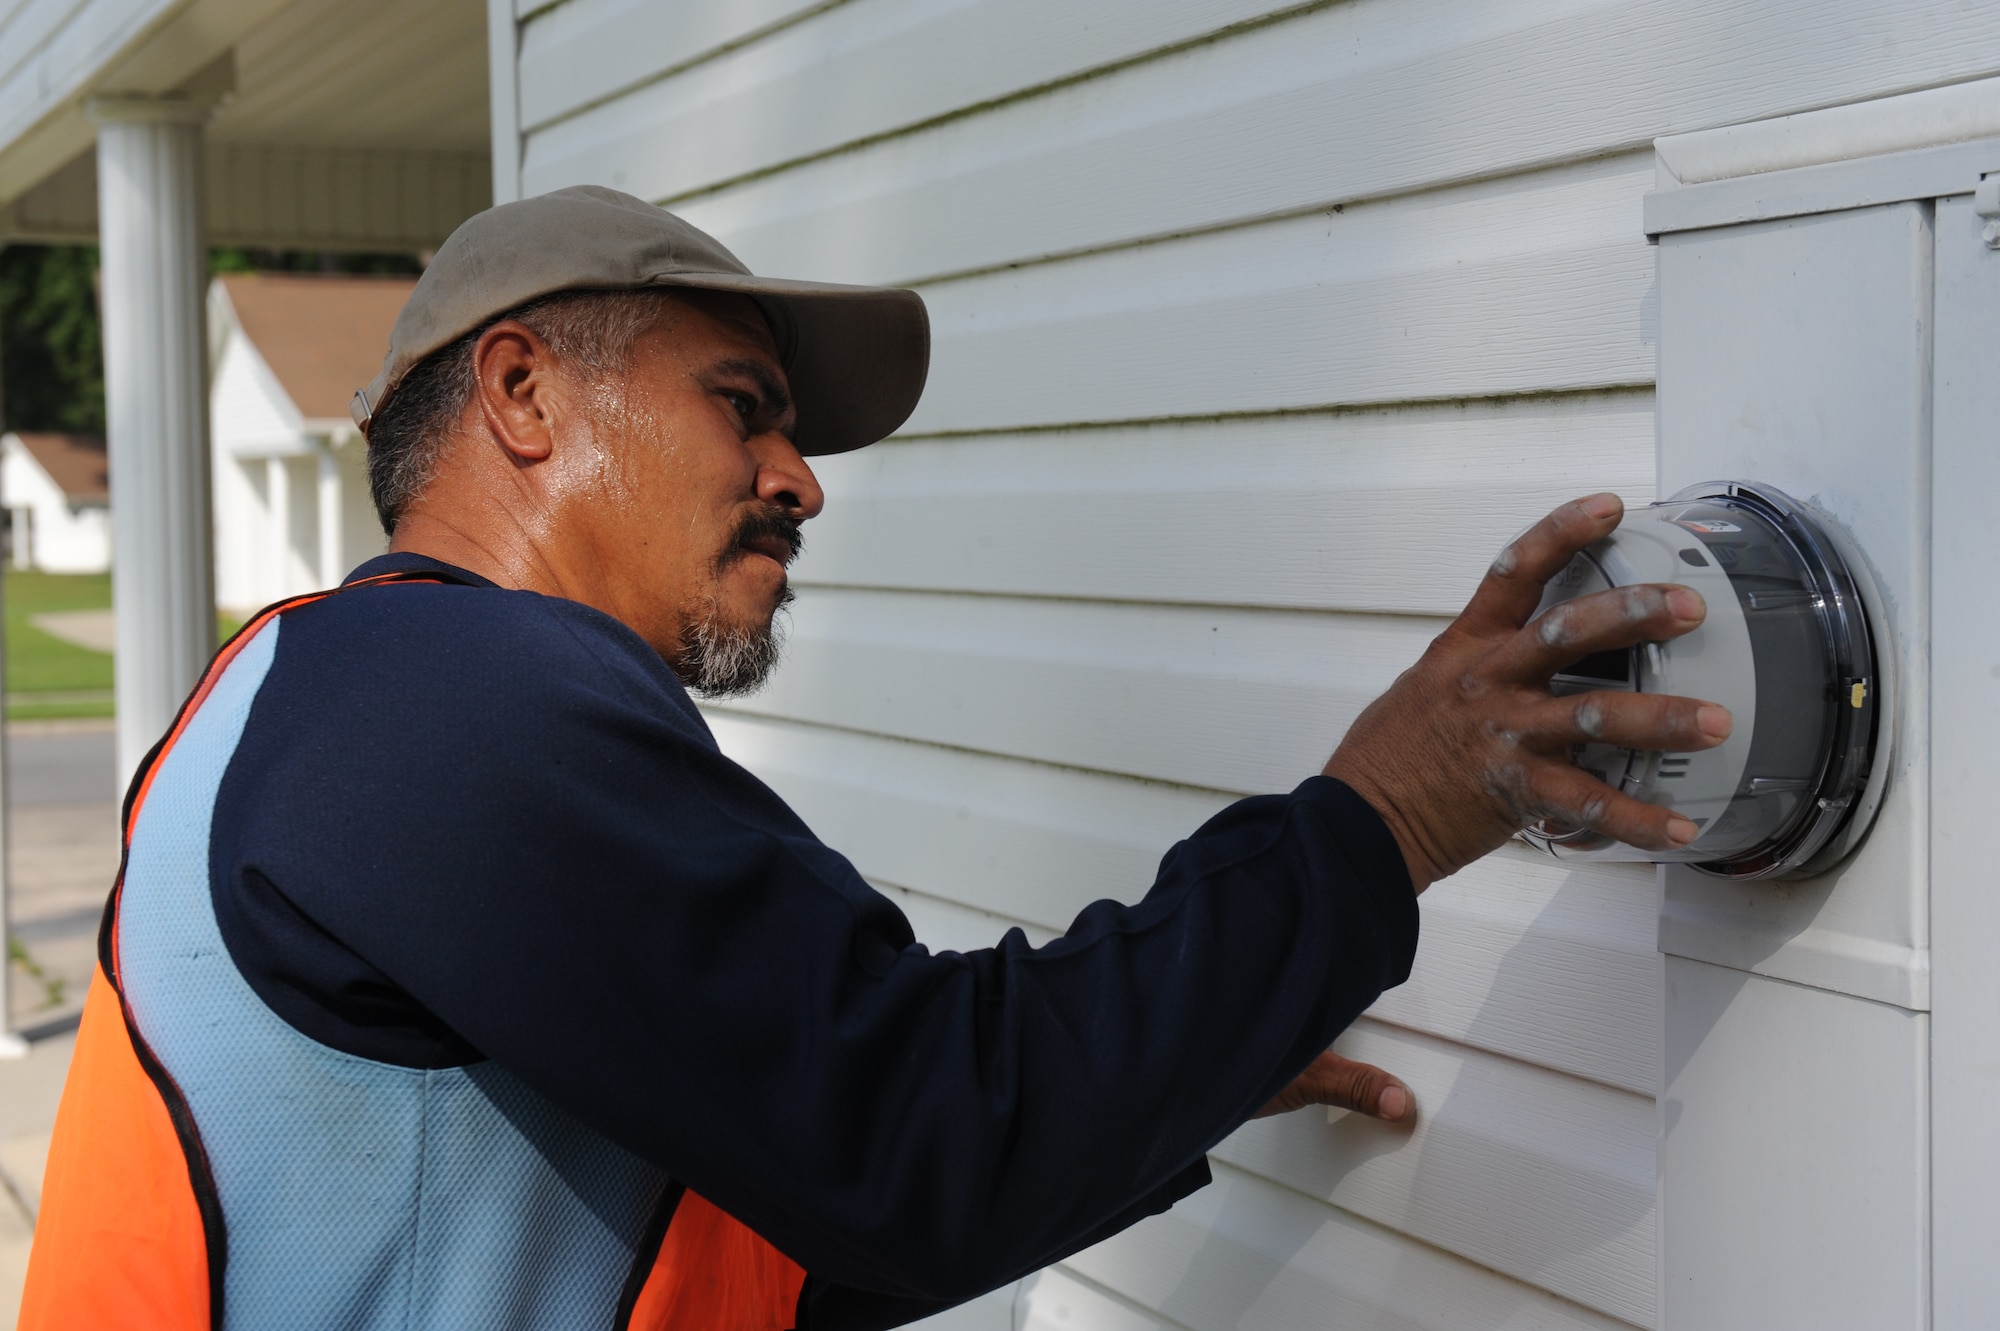 Lazaro Sierra, Sierra Enterprises owner, installs an electric meter to an on-base house July 23, 2014, at Seymour Johnson Air Force Base, North Carolina. Sierra and other workers installed meters on more than 600 on-base houses. (U.S. Air Force photo/Airman 1st Class Aaron J. Jenne)